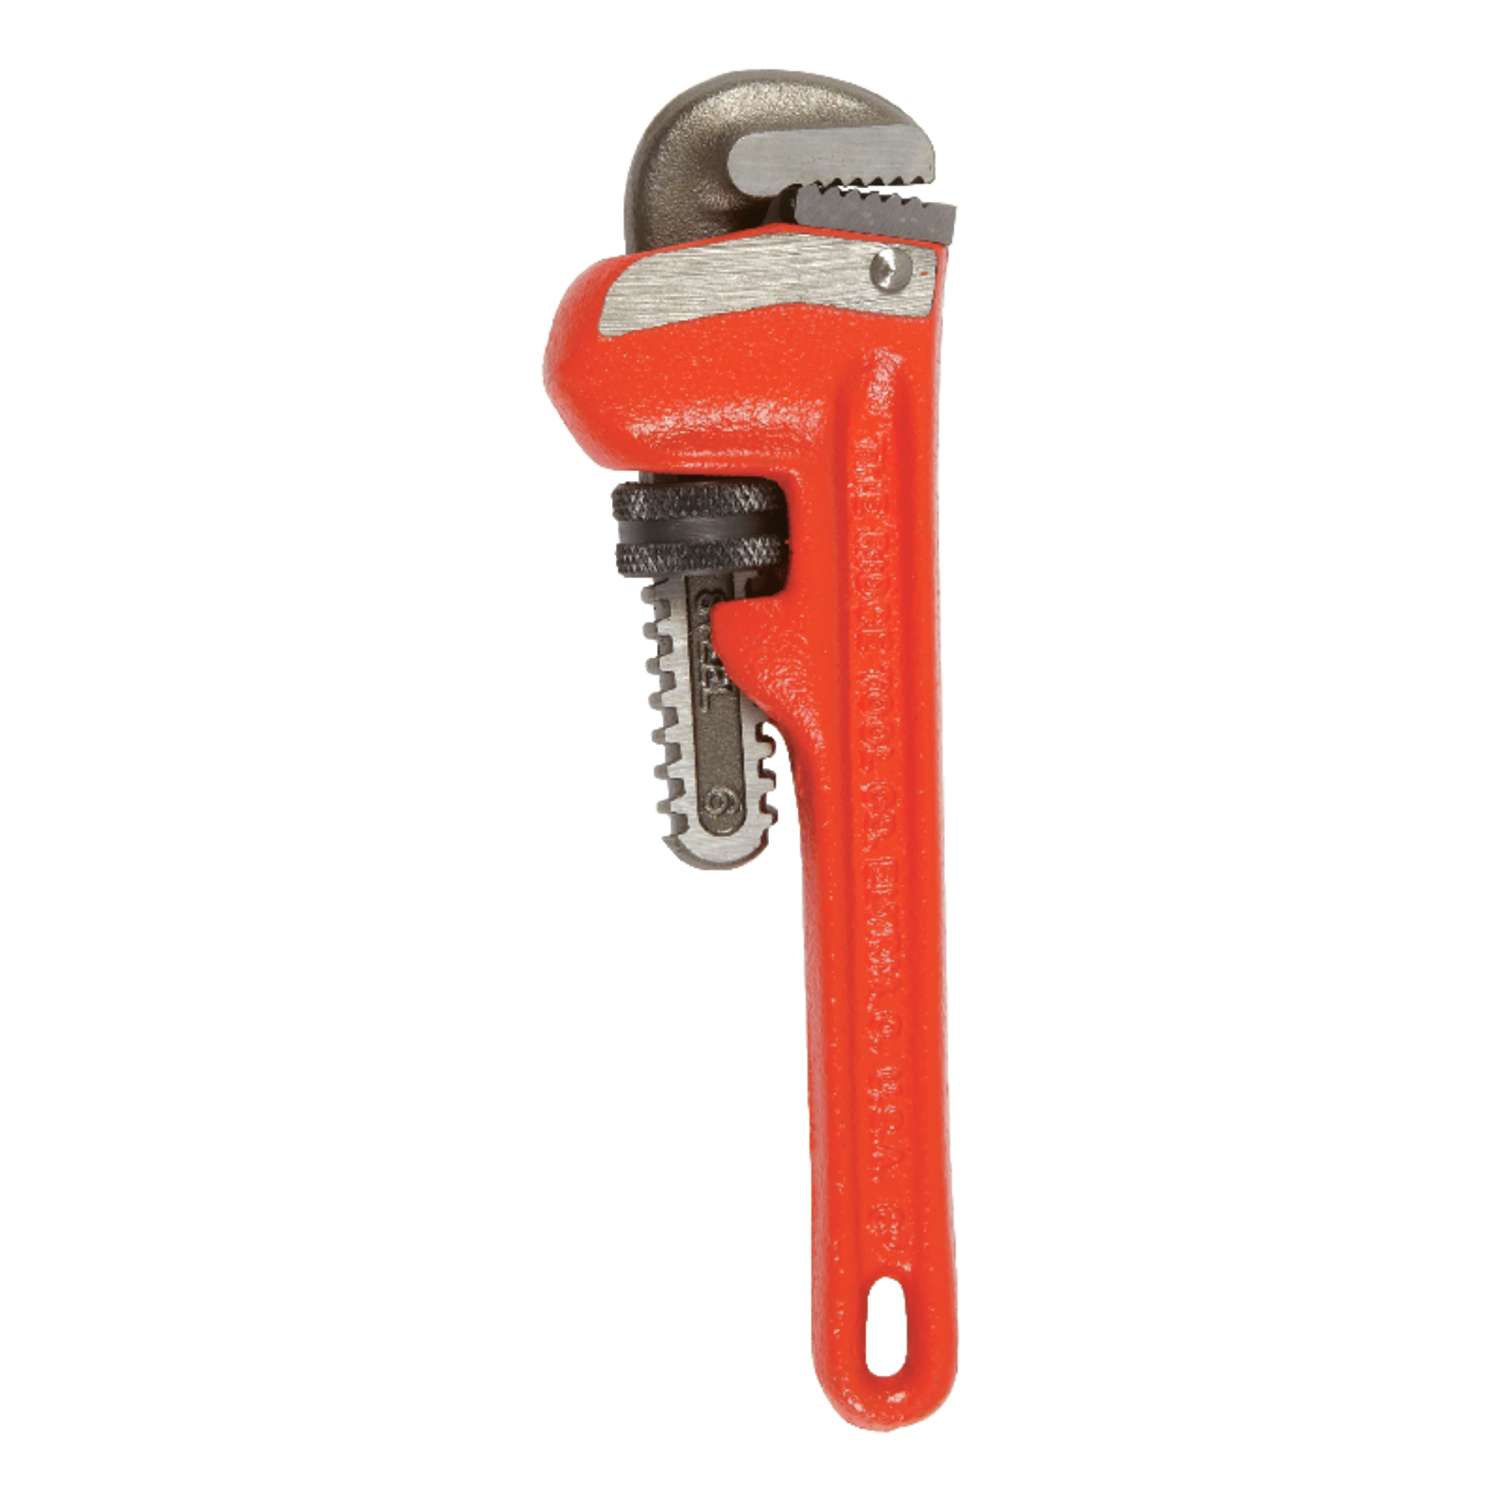 NEW FOOT WRENCH PIPE WRENCH 1/2"-1-1/4" RIDGID 300 700 141 161 Pipe Threader 811 